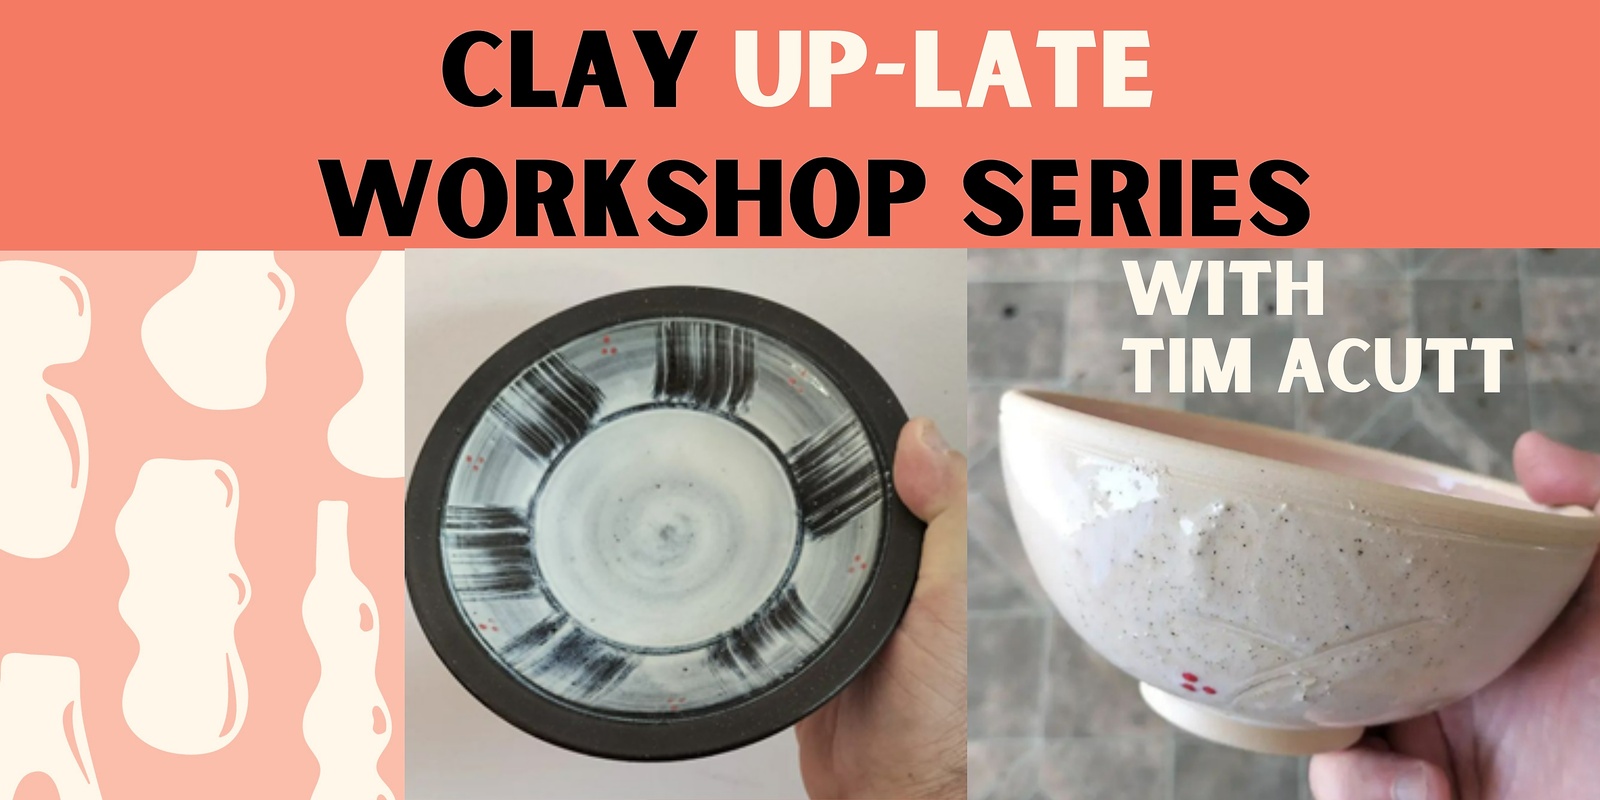 Banner image for 4 x Clay Up-late Workshop Series with Tim Acutt